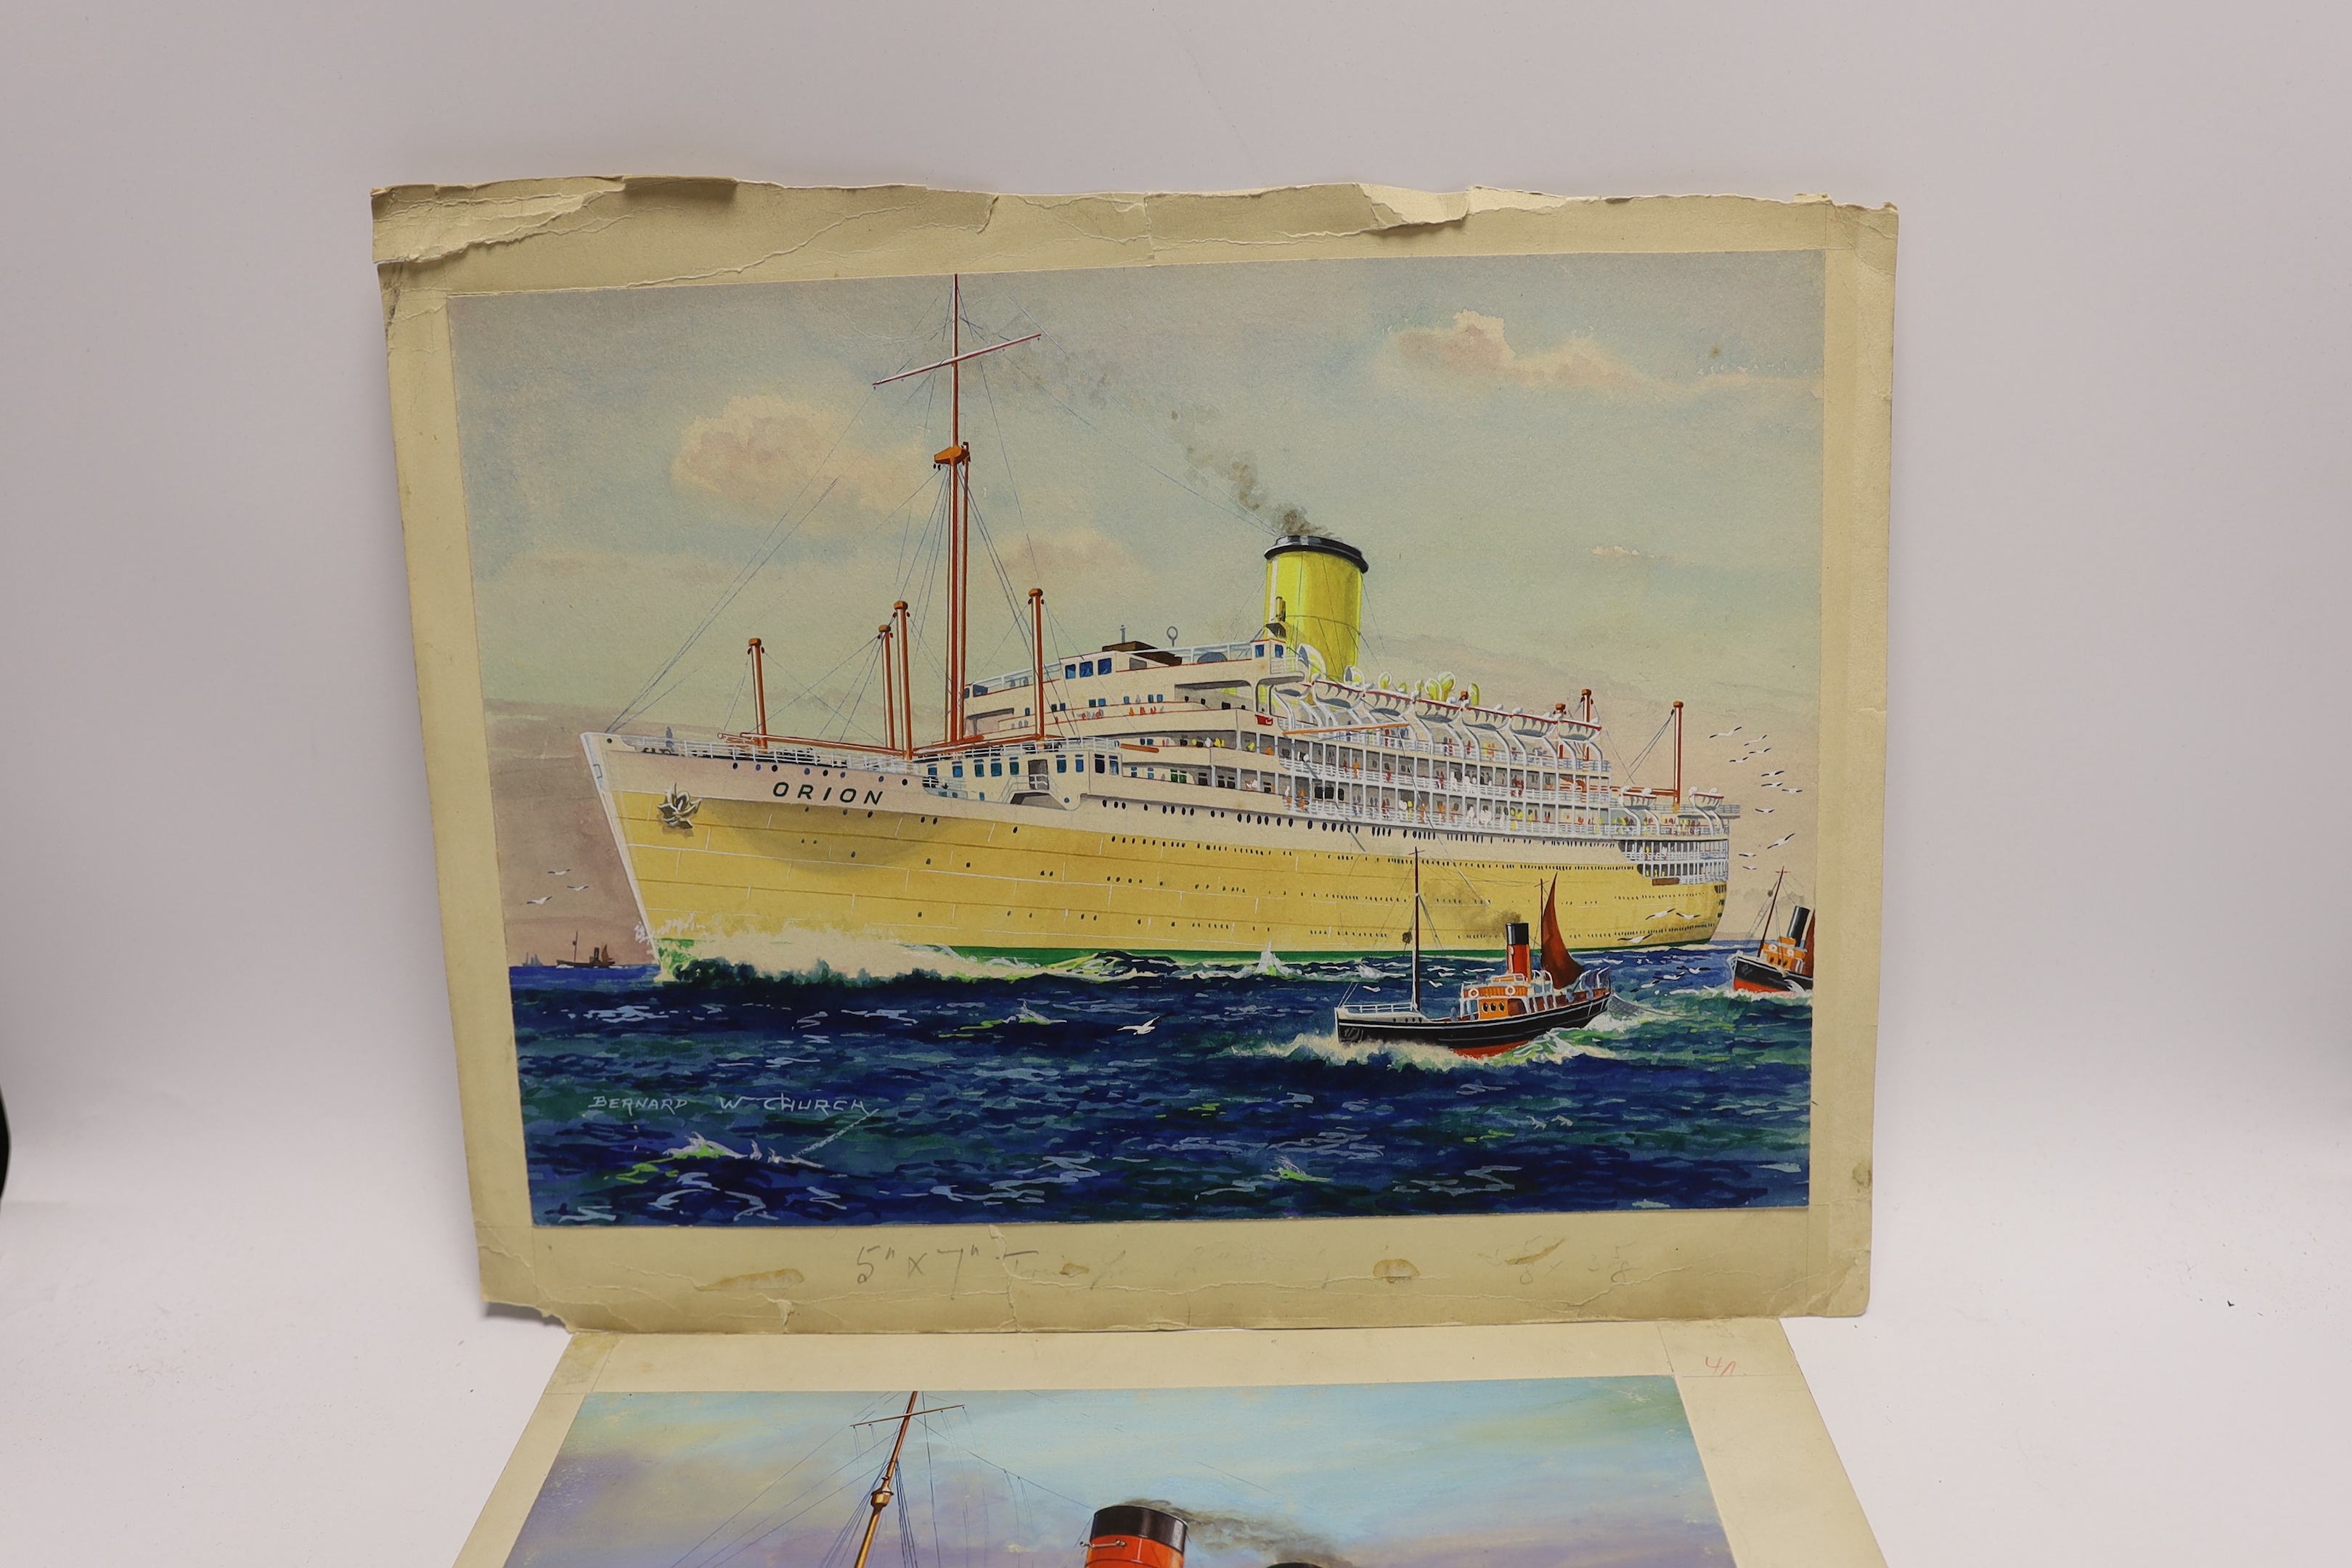 Bernard William Church, two watercolours of 1930s ocean liners, RMS Mauretania, Cunard White Star Line, 19 x 29cm and RMS Orion, Orient Line, 25.5 x 35.5cm, both signed